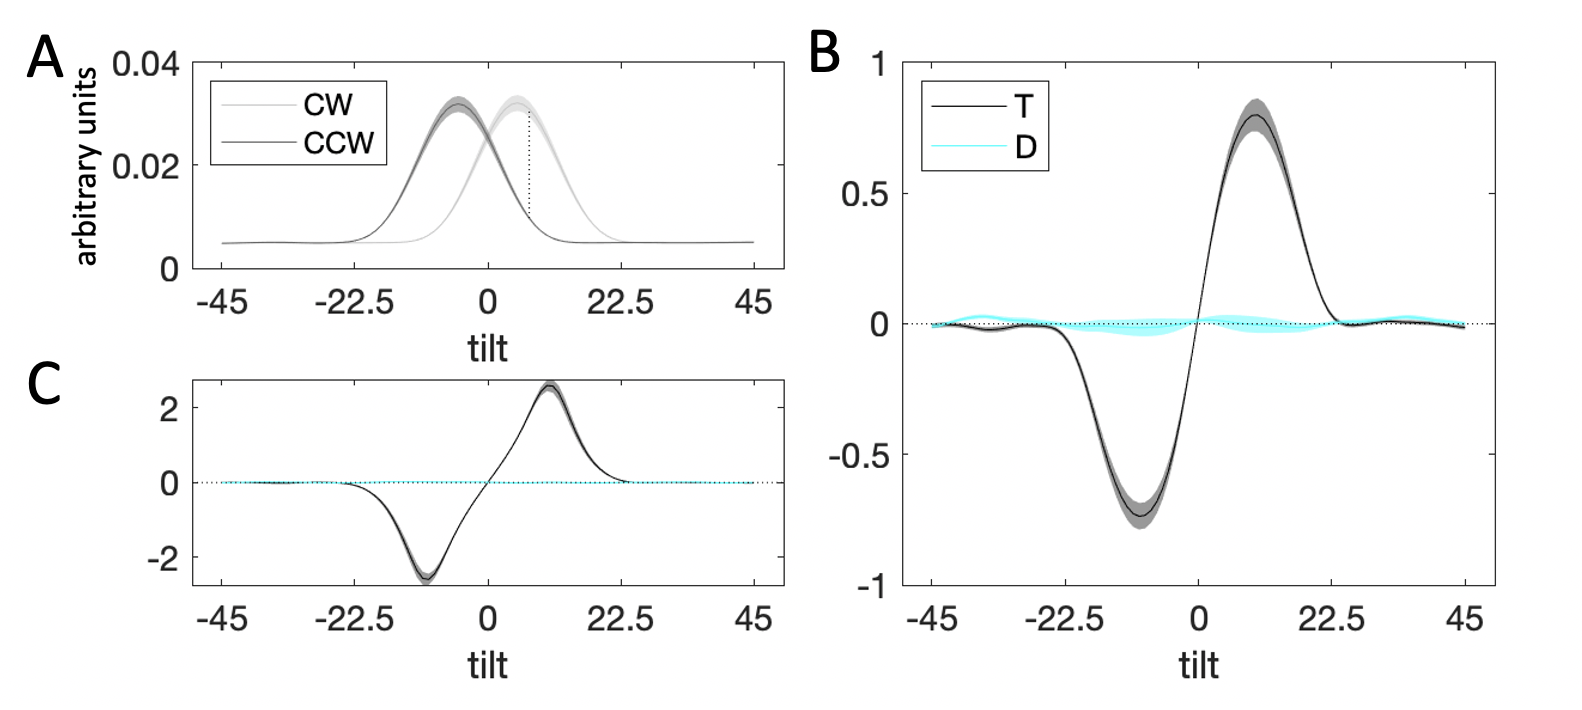 Decision kernel results. $\textbf{A:}$ Average stimulus energy profiles. Dark grey curve denotes CCW stimuli, light grey curve -- CW stimuli. Shaded regions correspond to M±SEM. The dashed line denotes maximum signal-to-noise ratio between the distribution for CW and CCW stimuli. $\textbf{B:}$ Decision kernel based on participant choices. Black curve denotes the kernel for the target stimulus, cyan curve -- the kernel for the distractor. Shaded regions correspond to M±SEM. $\textbf{C:}$ Decision kernel based on ground truth stimulus tilts. Black curve denotes the kernel for the target stimulus, cyan curve -- the kernel for the distractor. Shaded regions correspond to M±SEM.